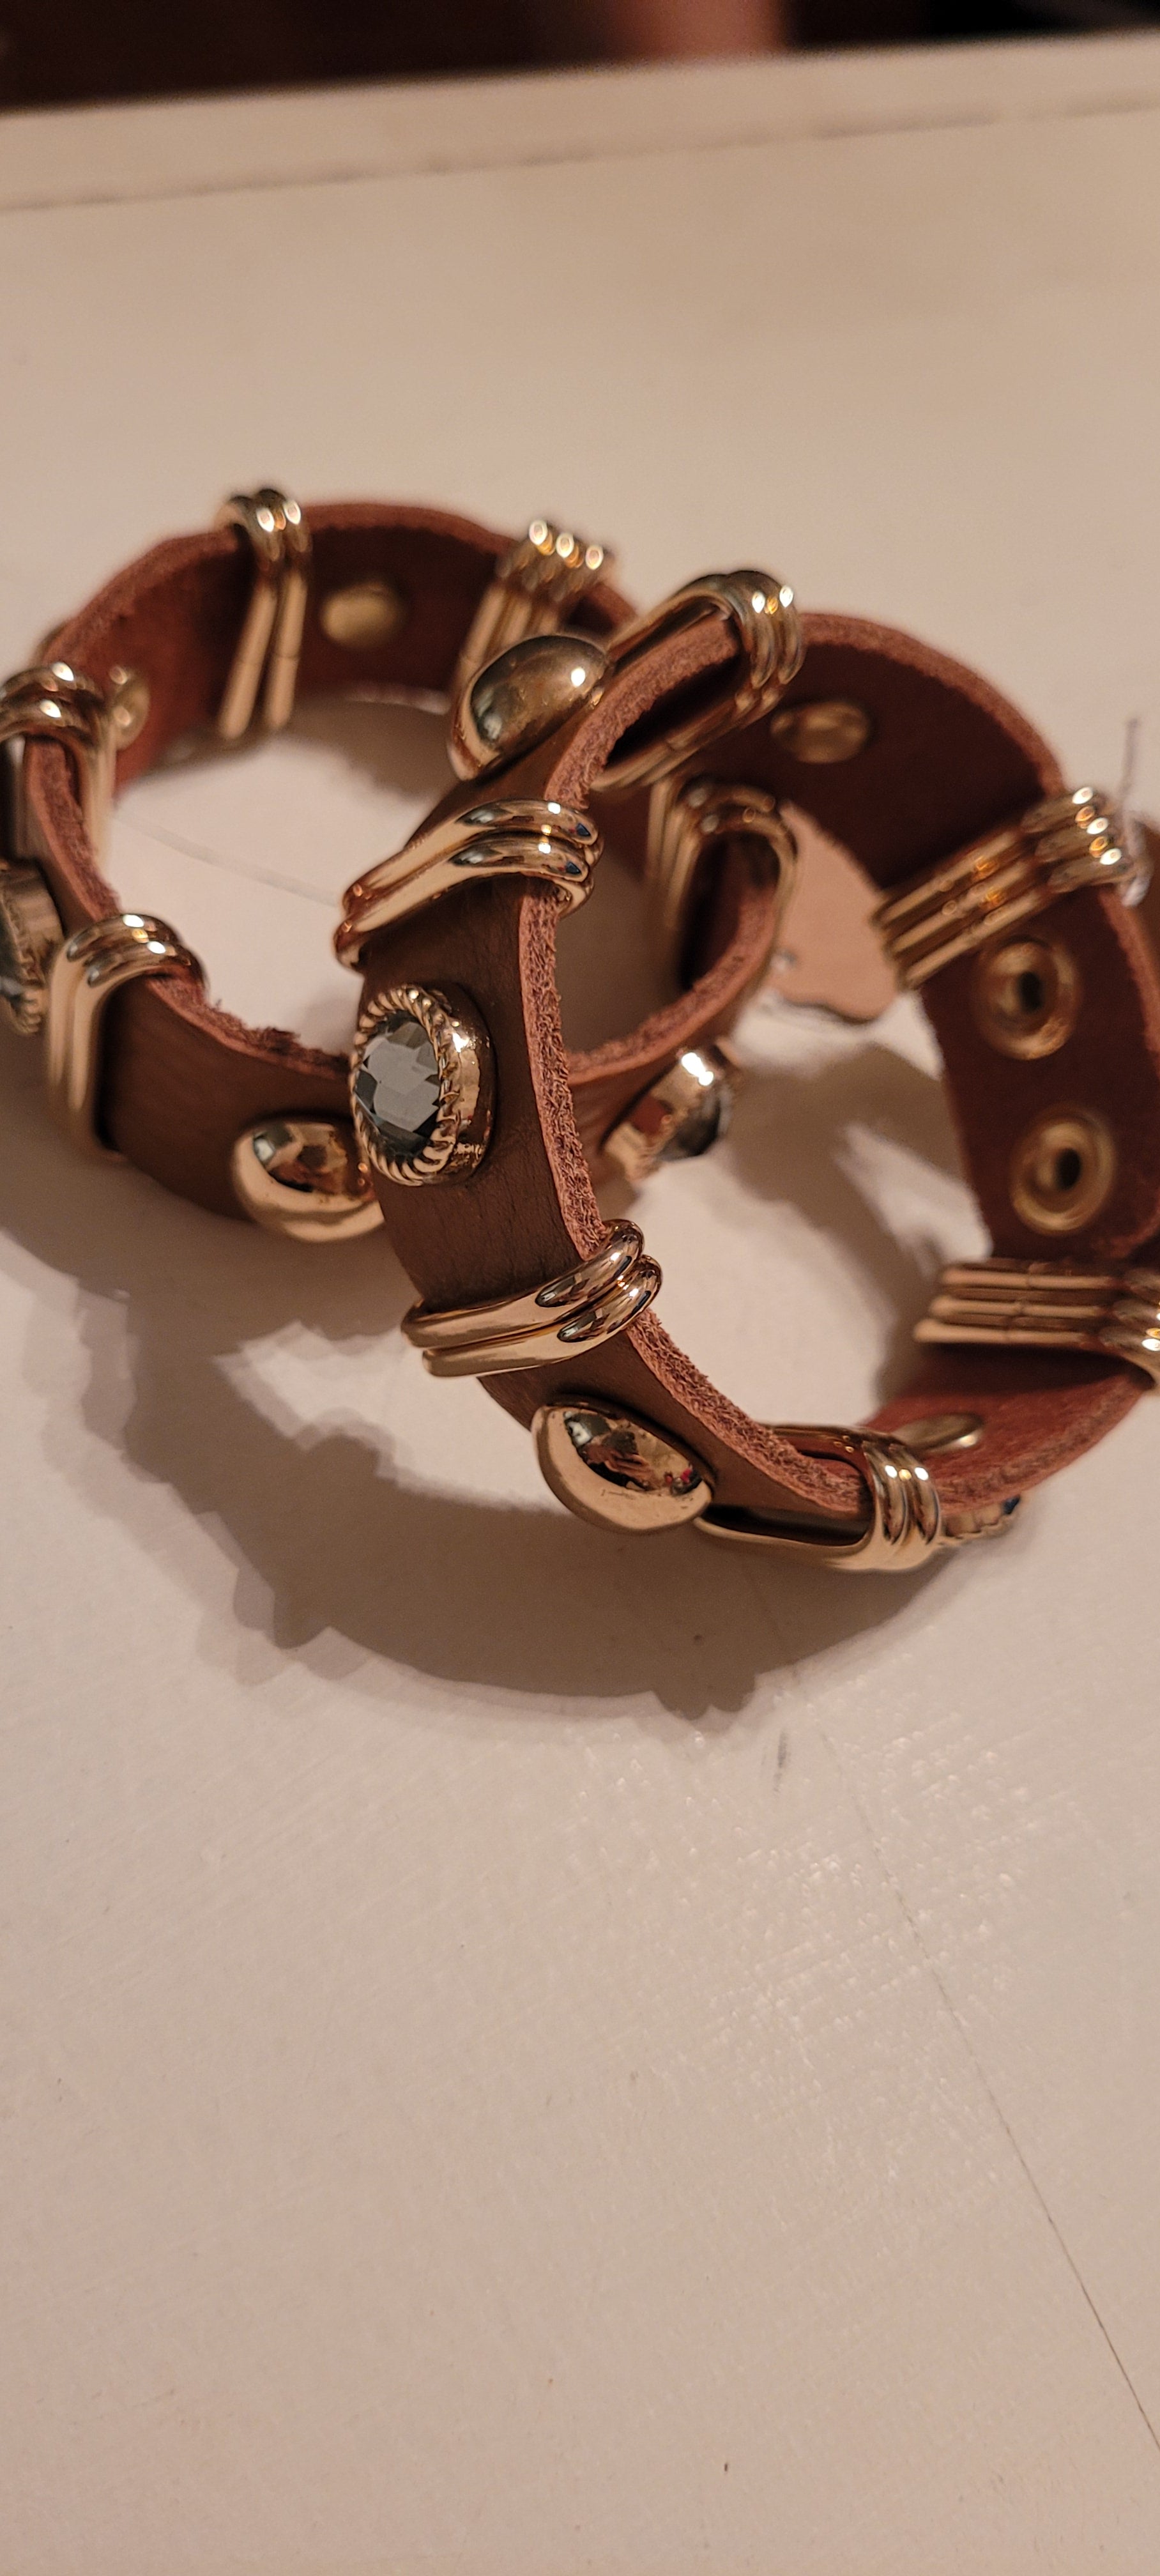 Brown leather bracelet with adjustable snap closure